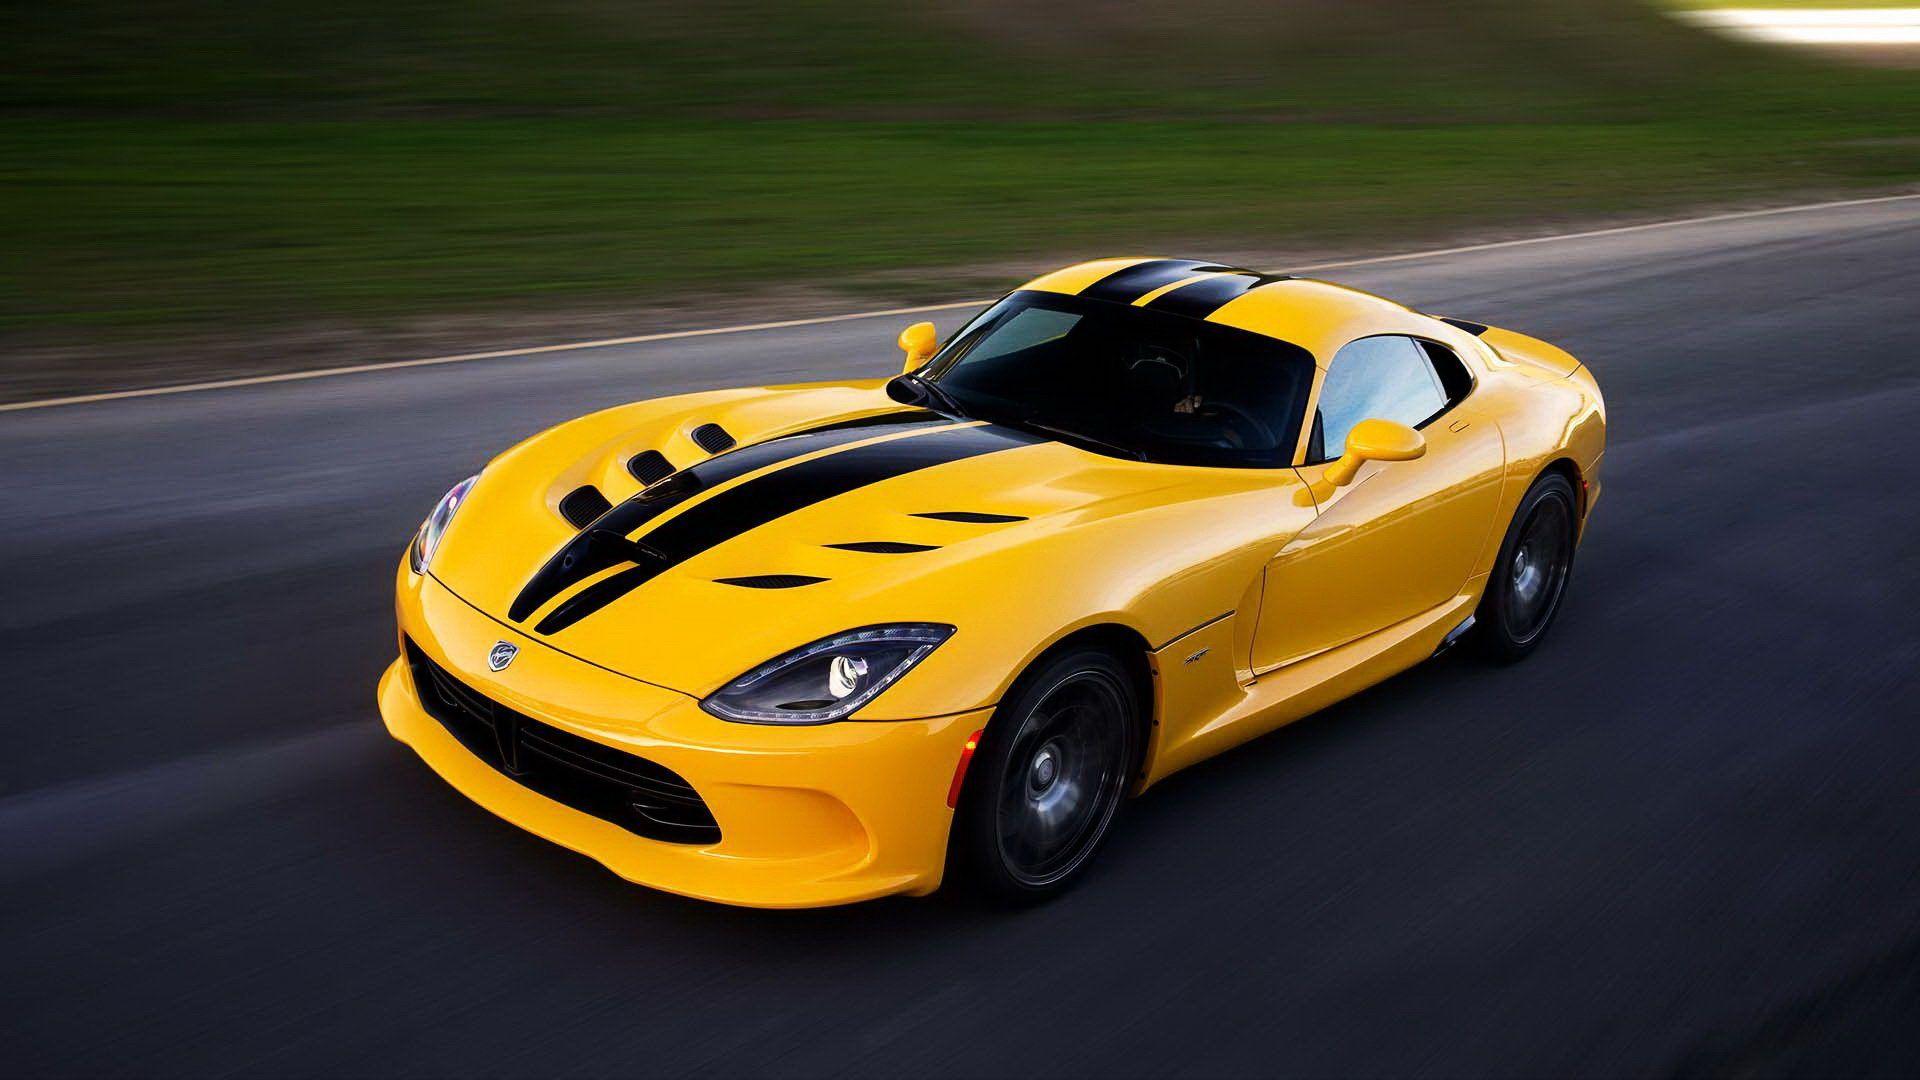 Dodge Viper 2016 Gts High Definition About Gallery Car